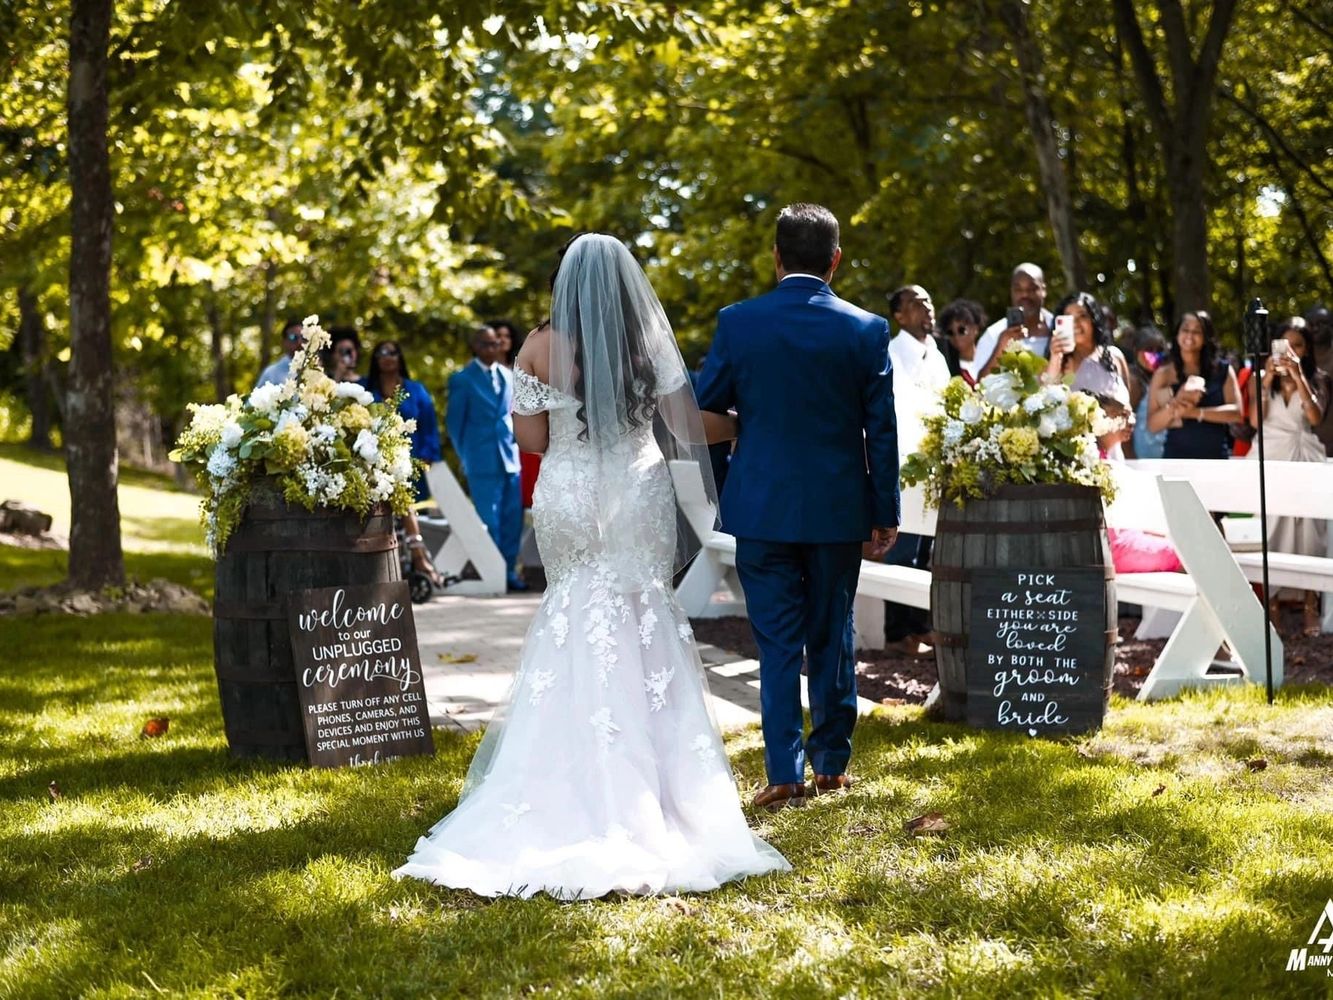 Father of the Bride and bride walking into outside wooded wedding ceremony wooden barrels flowers